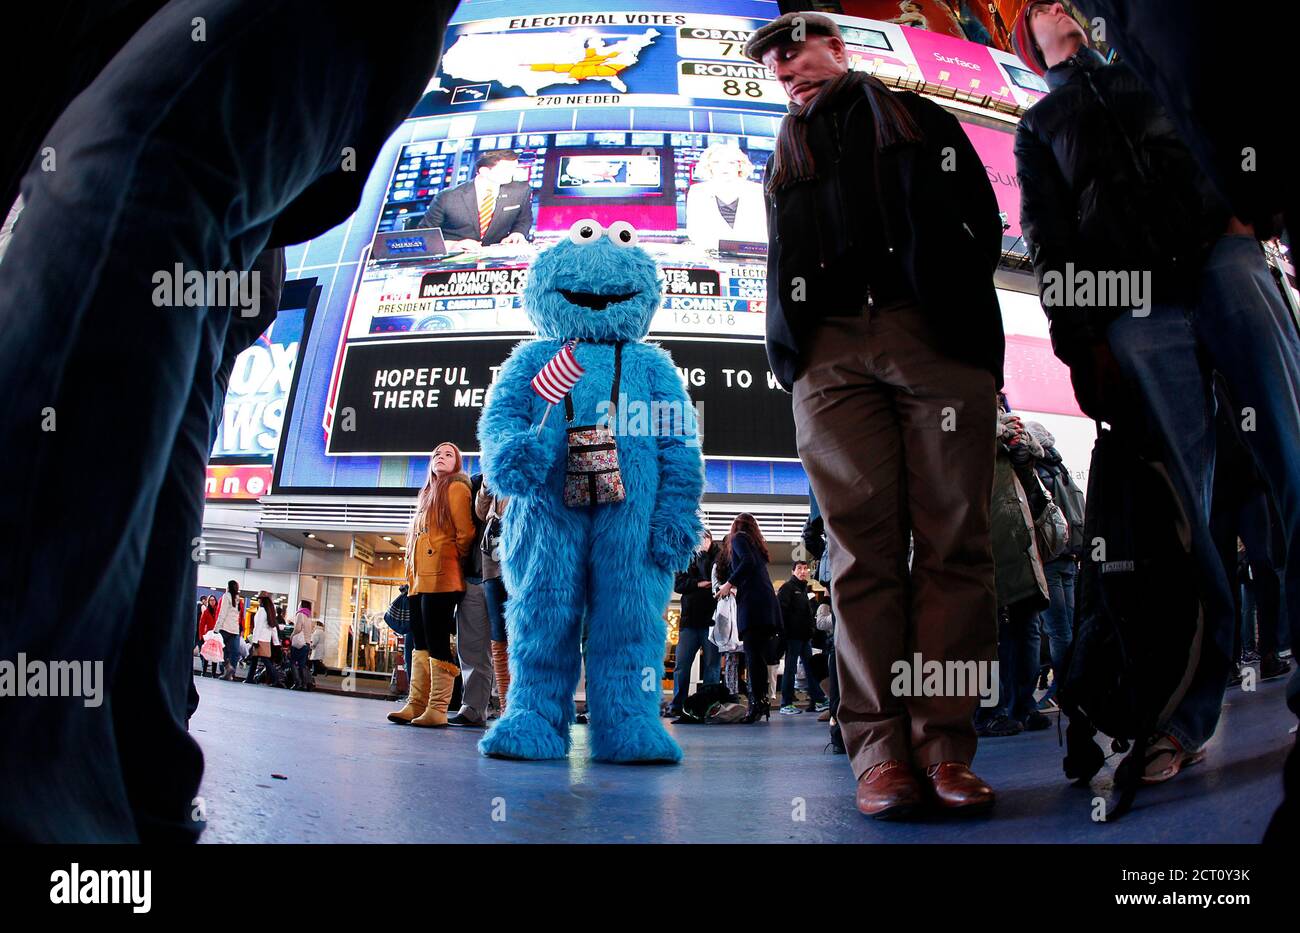 A man dressed as the character Cookie Monster watches TV screens in Times Square giving U.S presidential election results in New York November 6, 2012. REUTERS/Carlo Allegri  (UNITED STATES - Tags: POLITICS USA PRESIDENTIAL ELECTION ELECTIONS) Stock Photo